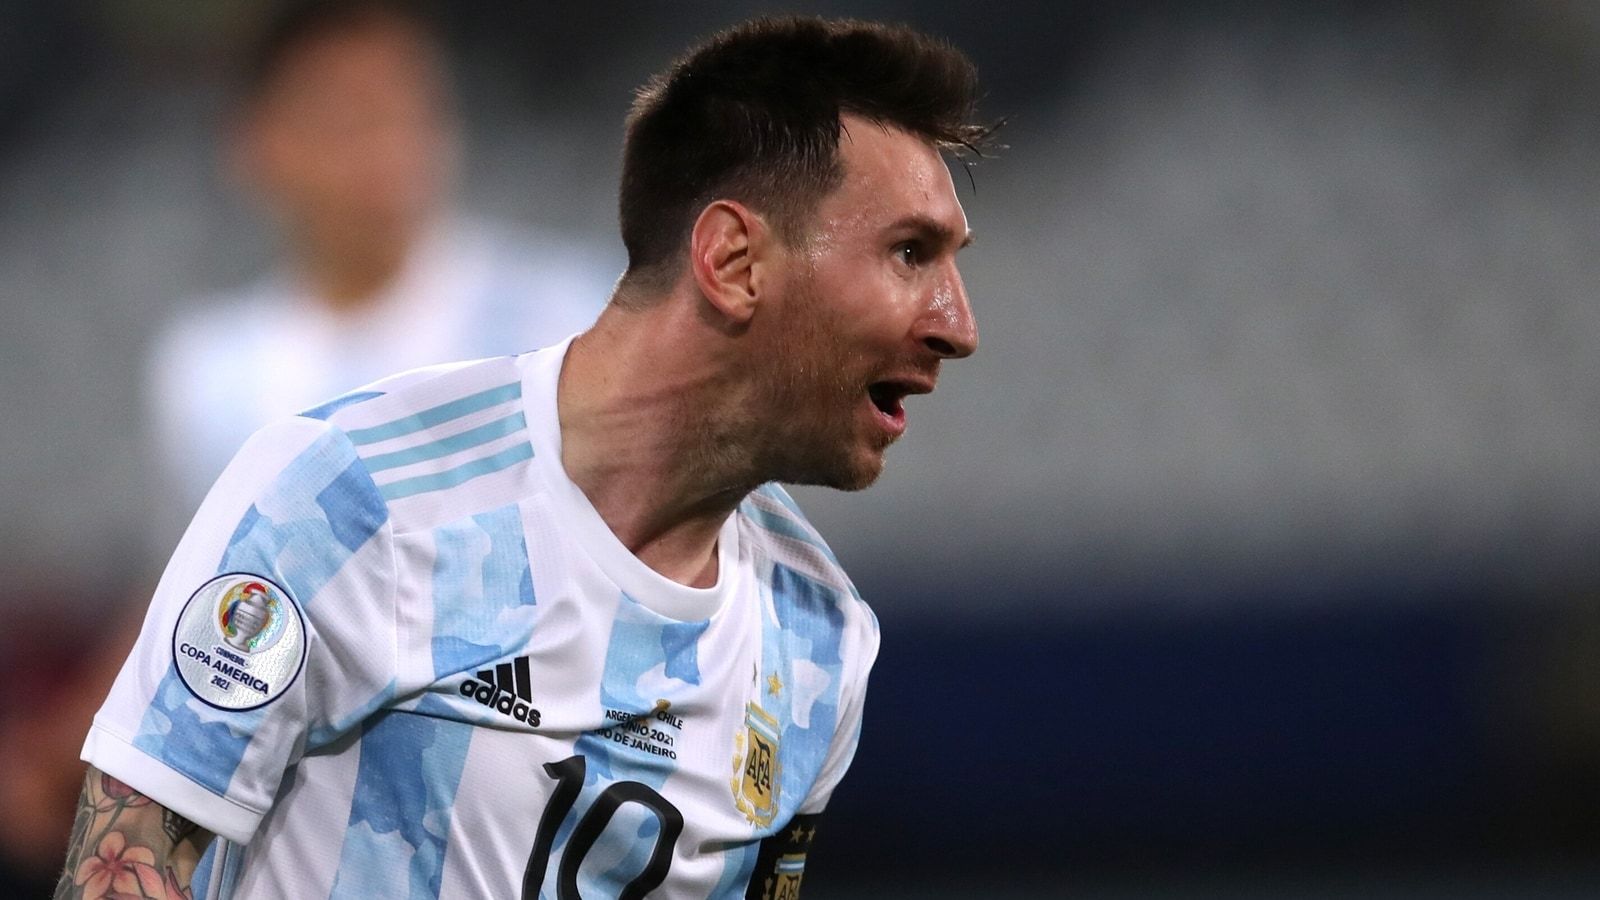 Messi freekick' trends on Twitter after Argentina legend's magical goal vs Chile in Copa America